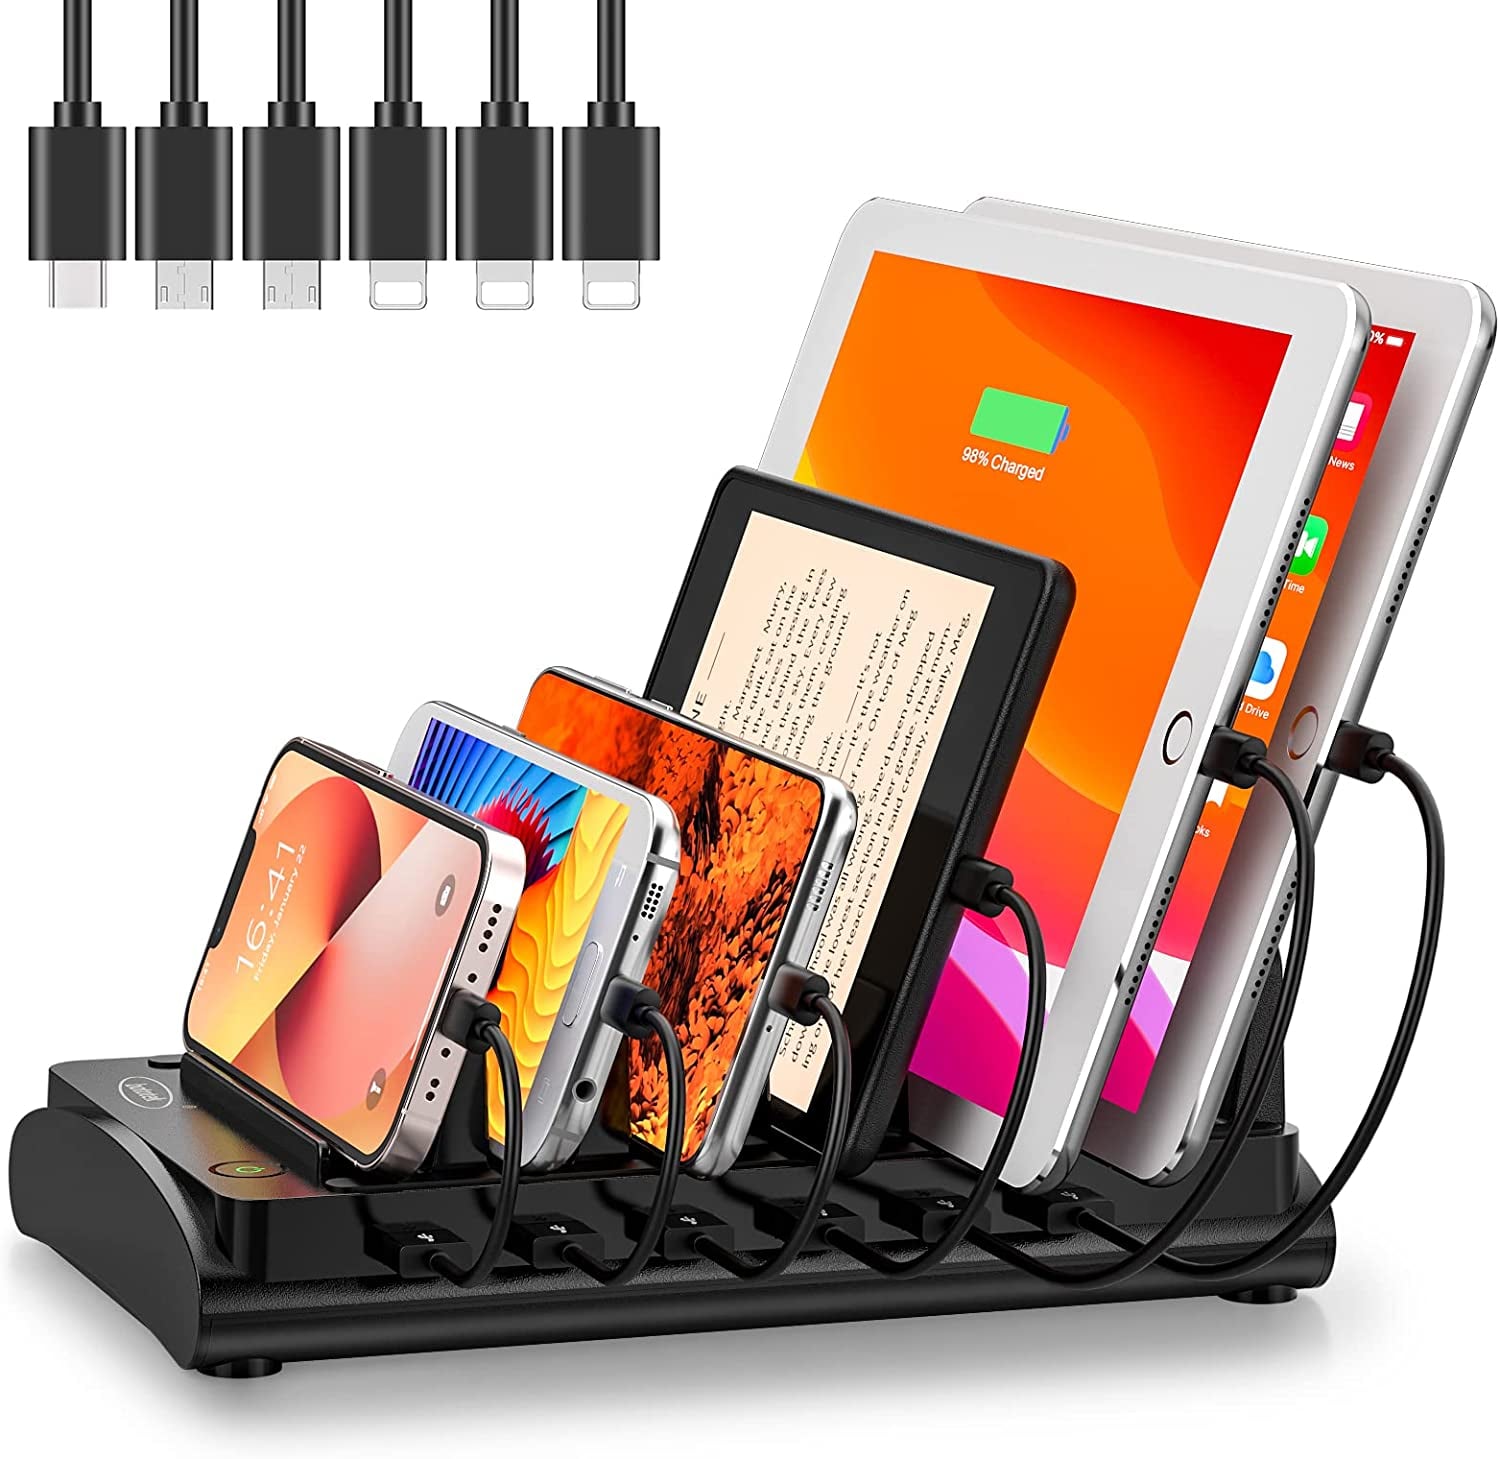 Charging Station For the Whole Family: Bototek 60W USB Charging Station